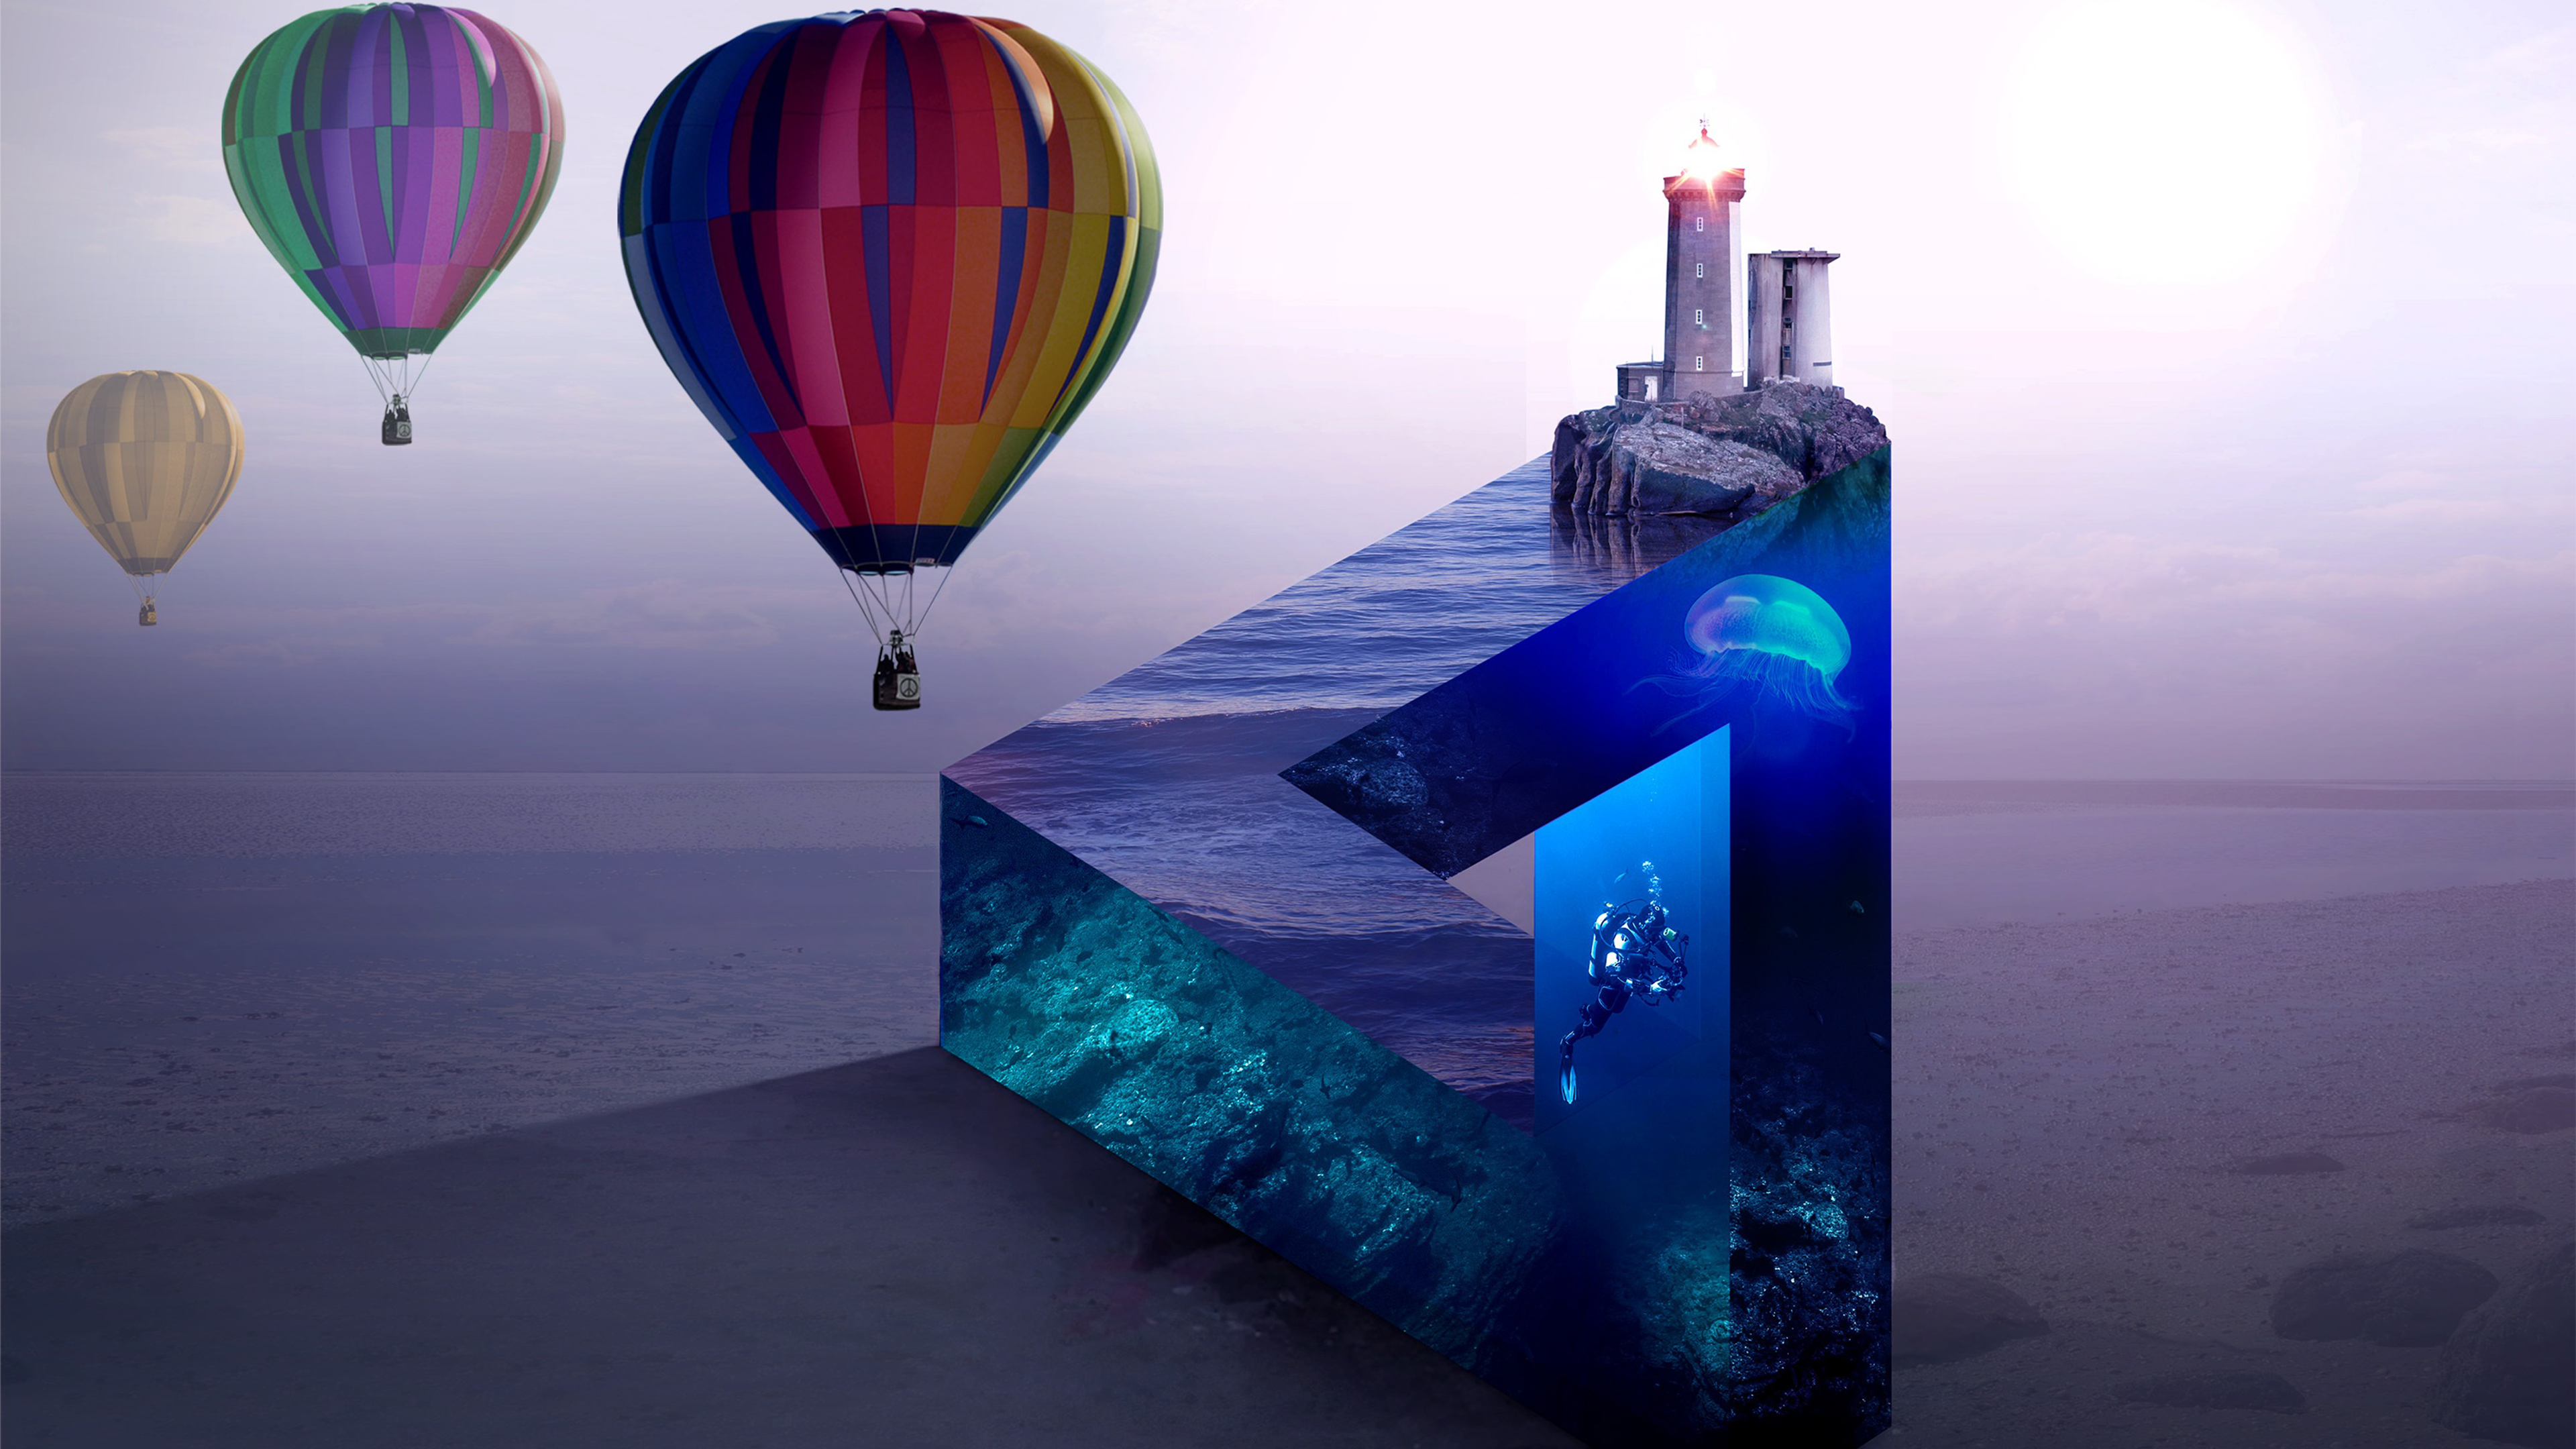 General 3840x2160 photo manipulation digital art hot air balloons simple background lighthouse